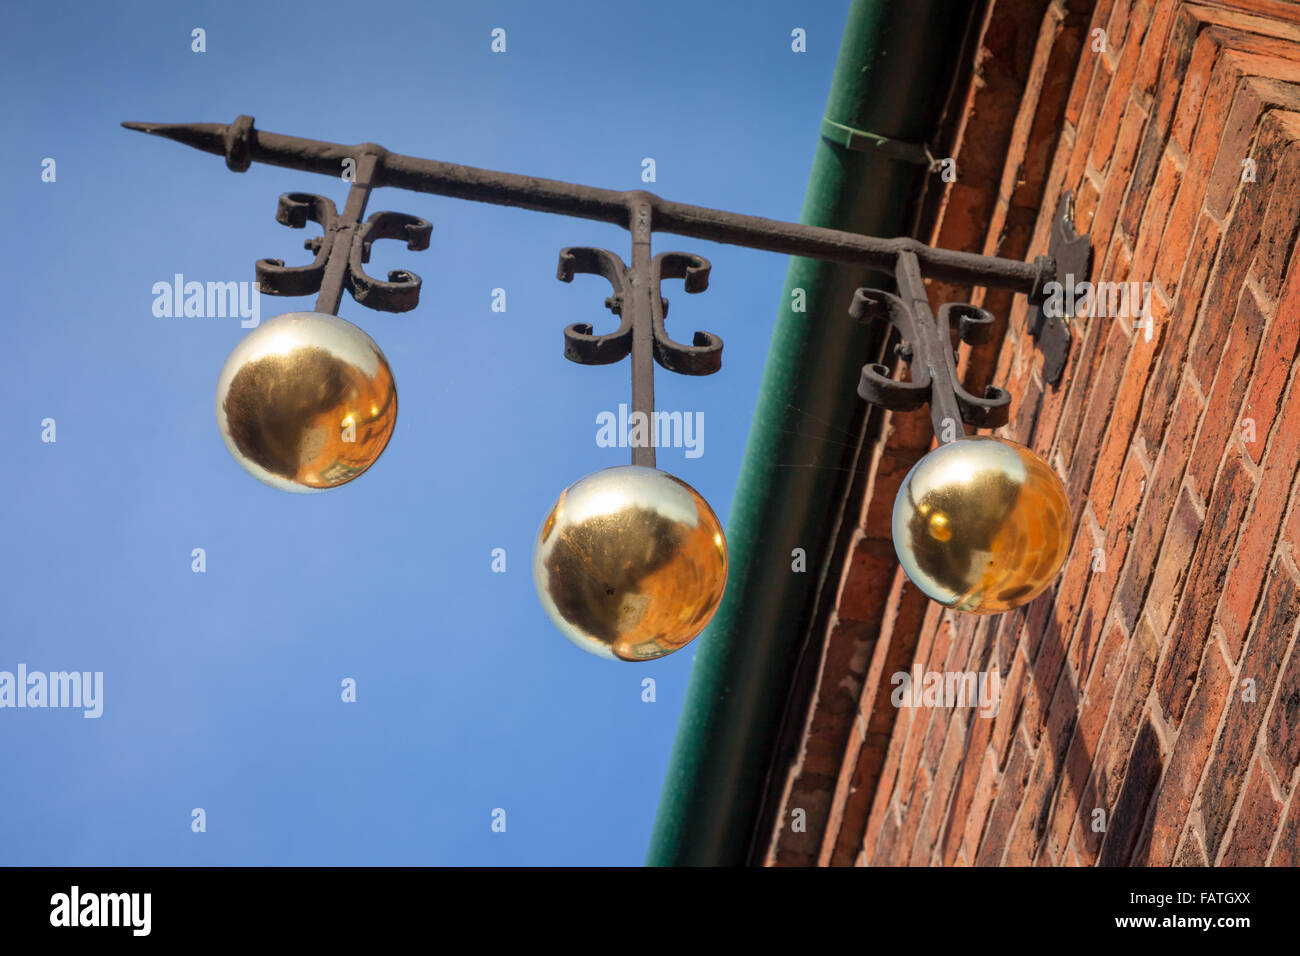 Pawn shop golden balls hanging sign outside an old fashioned pawnshop, Dudley UK Stock Photo